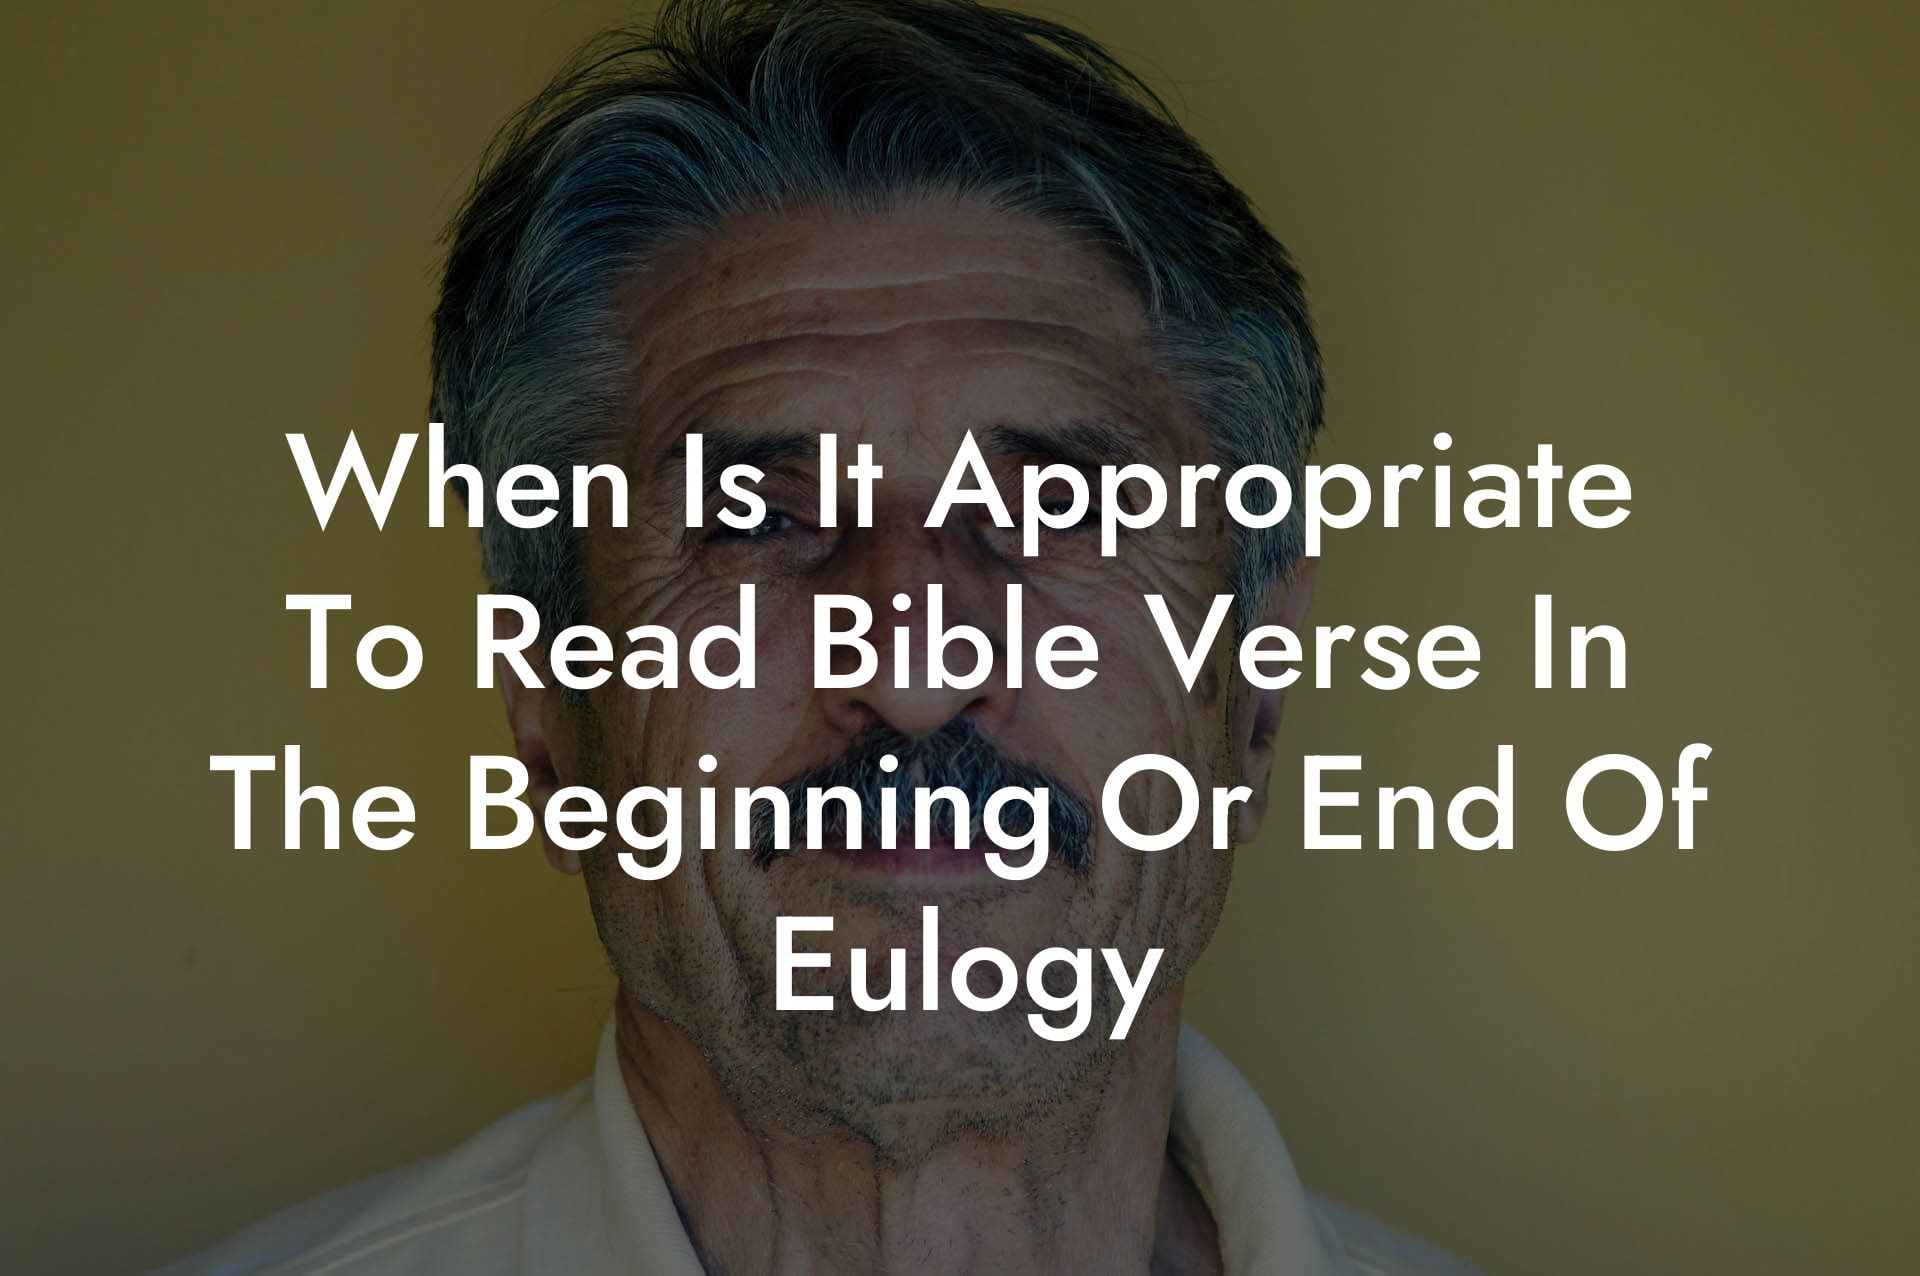 When Is It Appropriate To Read Bible Verse In The Beginning Or End Of Eulogy